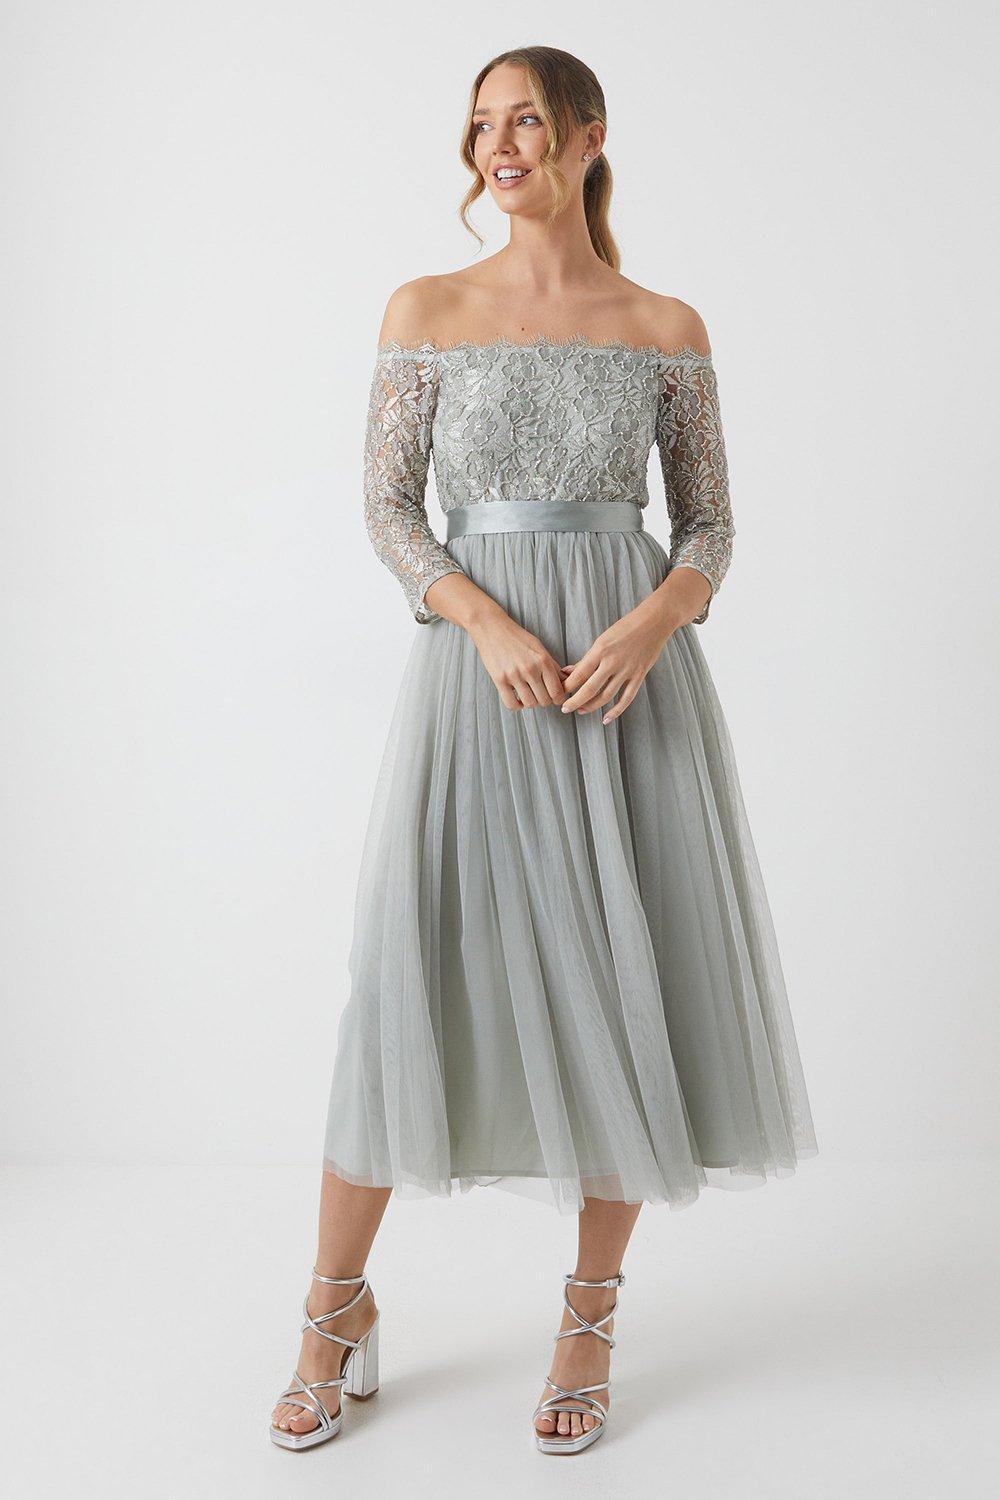 Embellished Lace Two In One Bardot Bridesmaids Dress - Sage